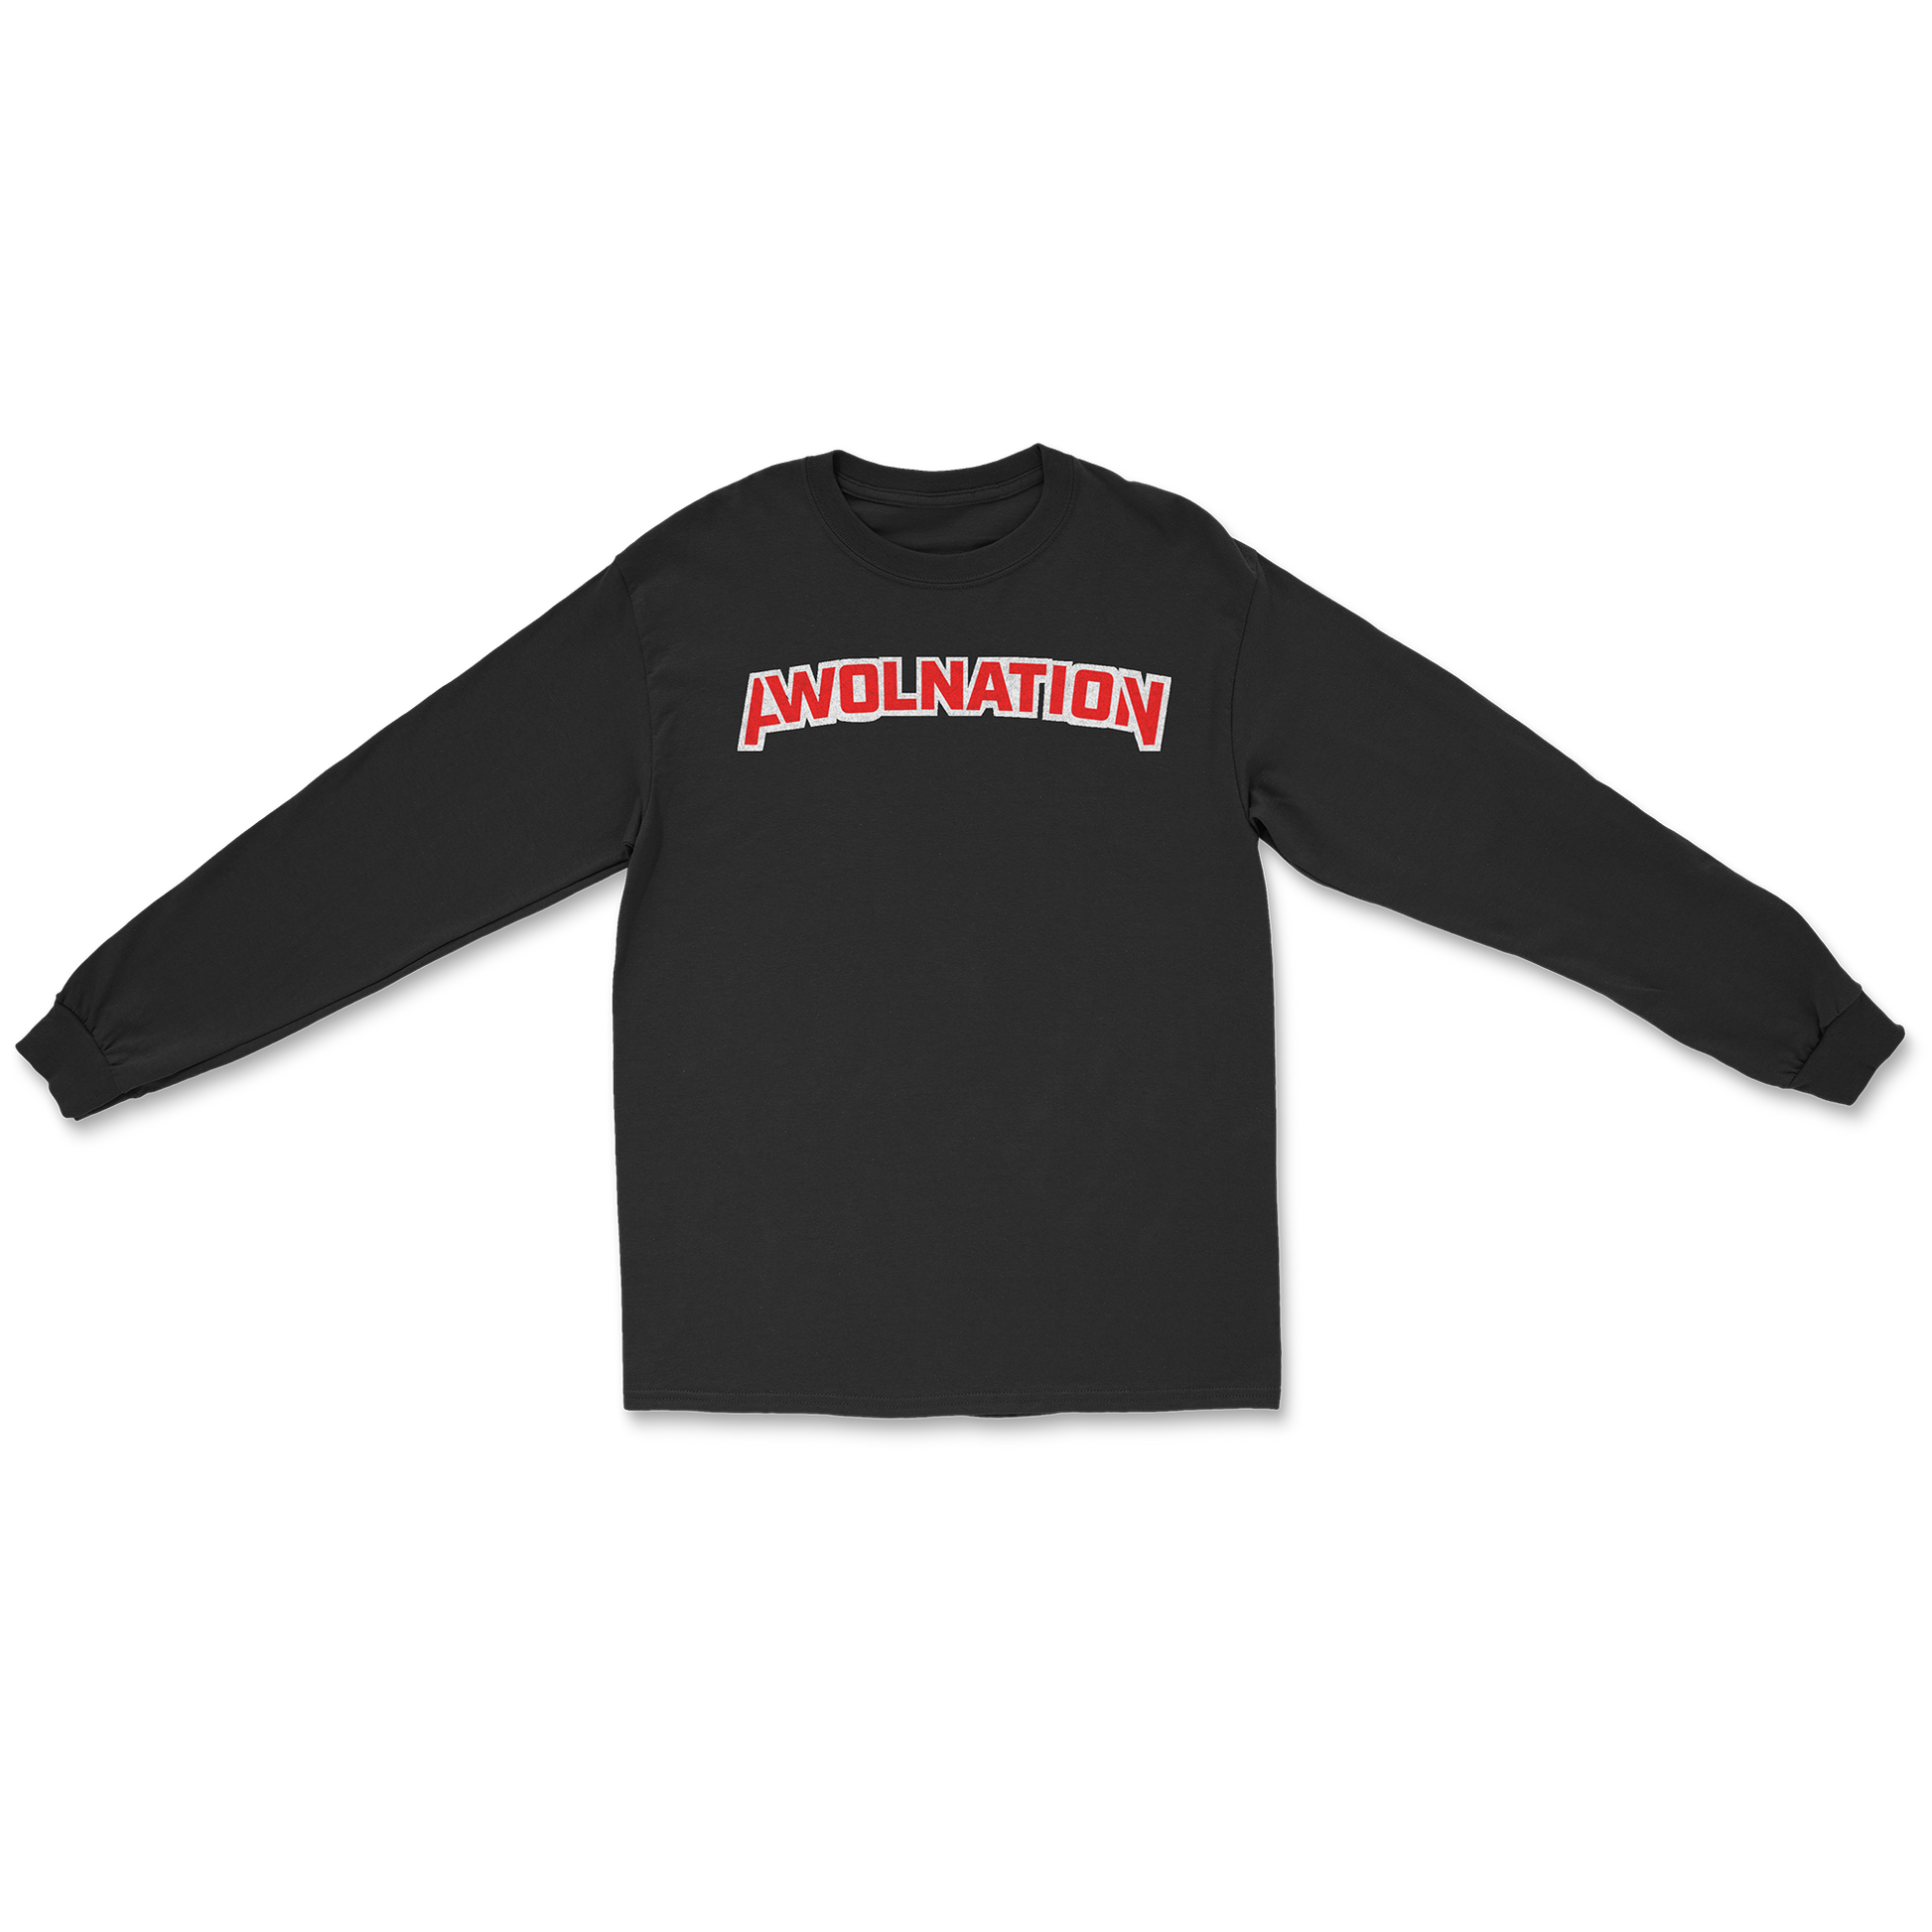 AWOLNATION Disco Long Sleeve Tee Black front